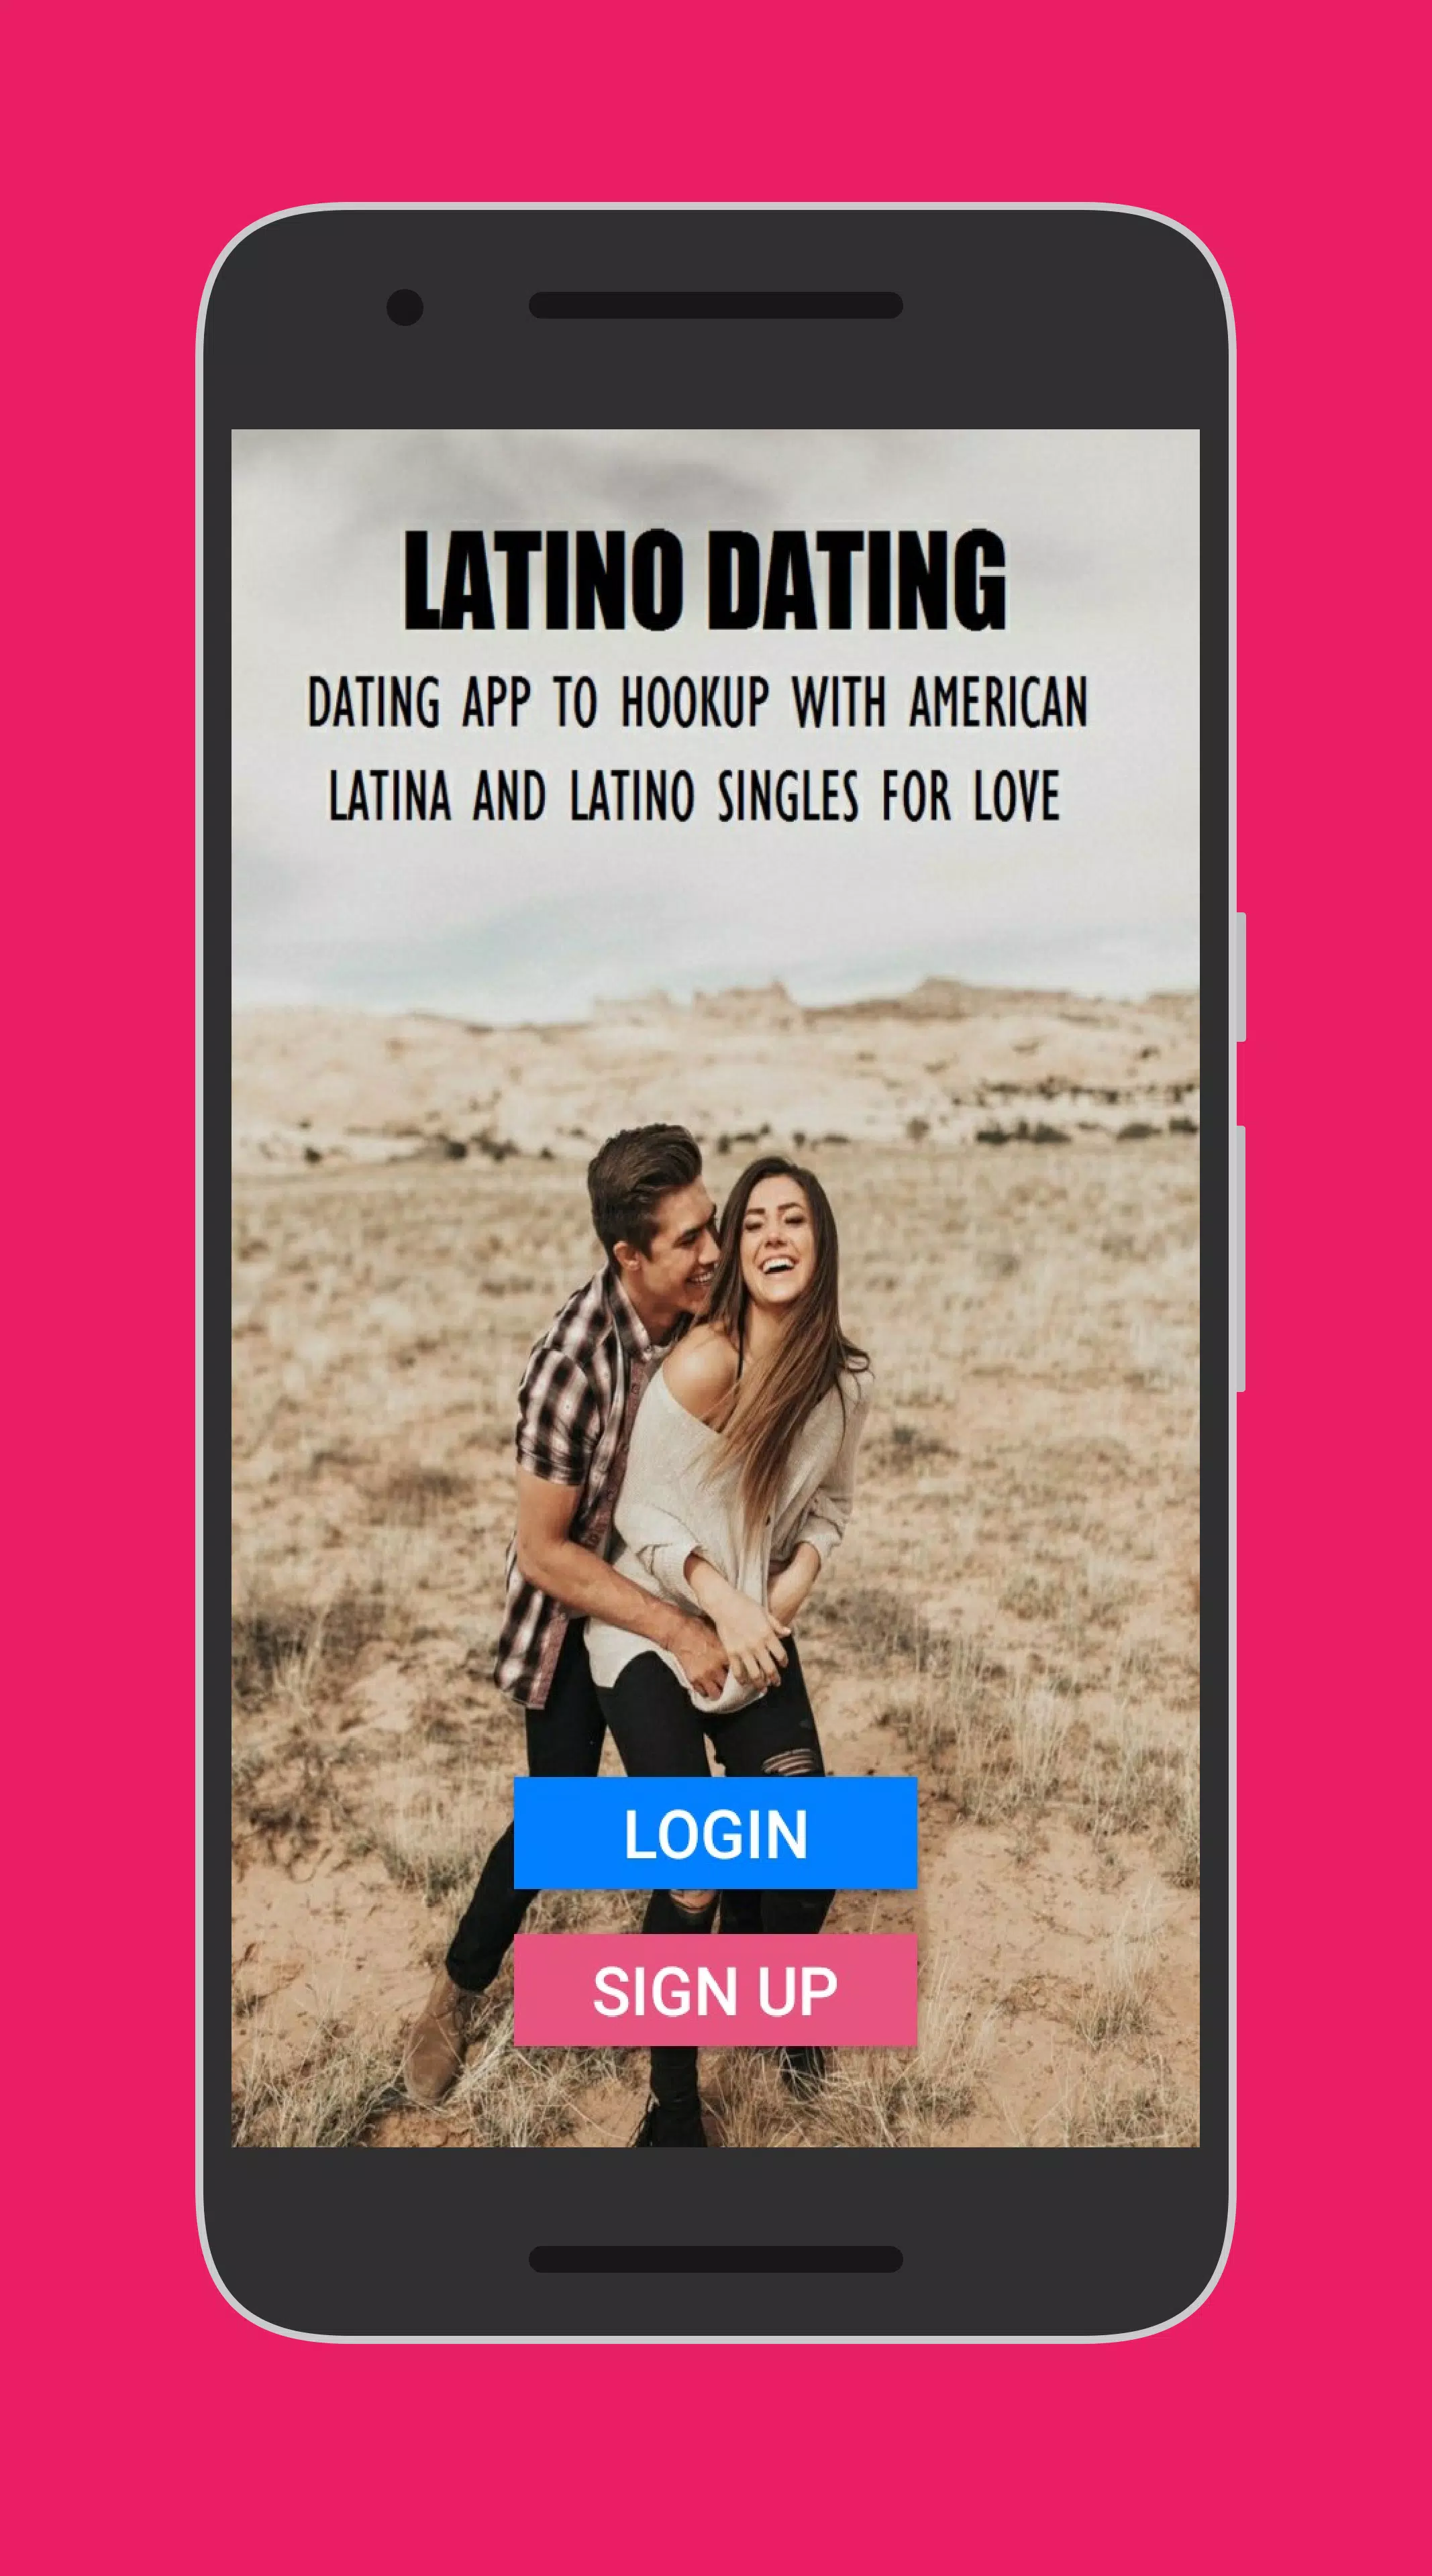 Enjoy a secure and easy-to-use latina dating app